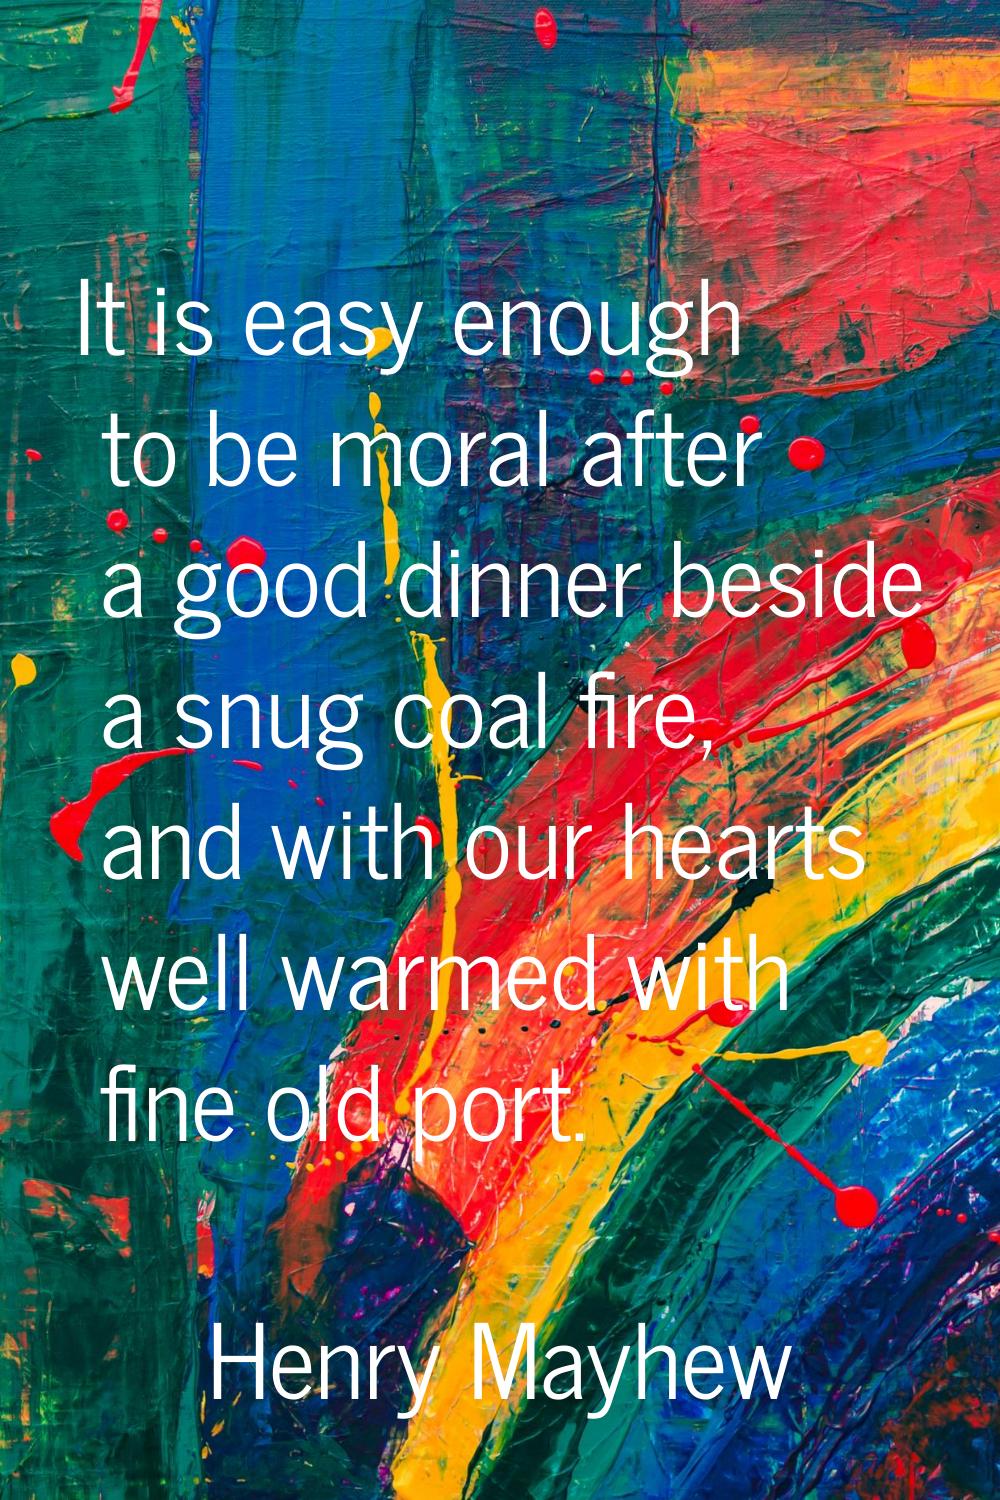 It is easy enough to be moral after a good dinner beside a snug coal fire, and with our hearts well